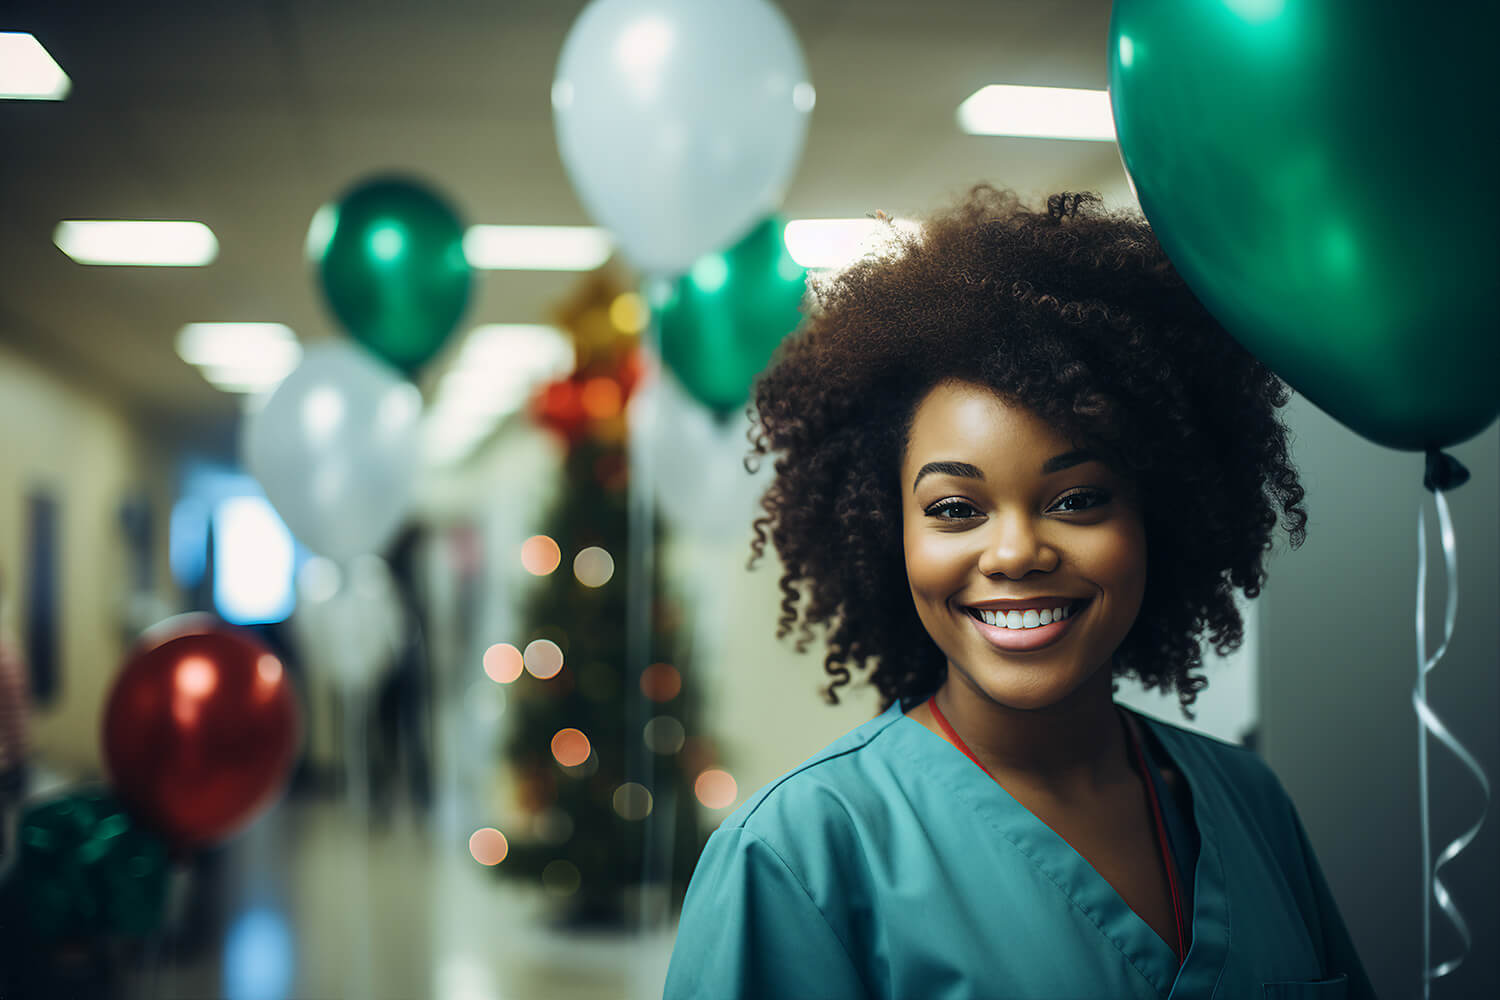 View Shift Work and Christmas Celebrations for UK Nurses: The Ultimate Balancing Act